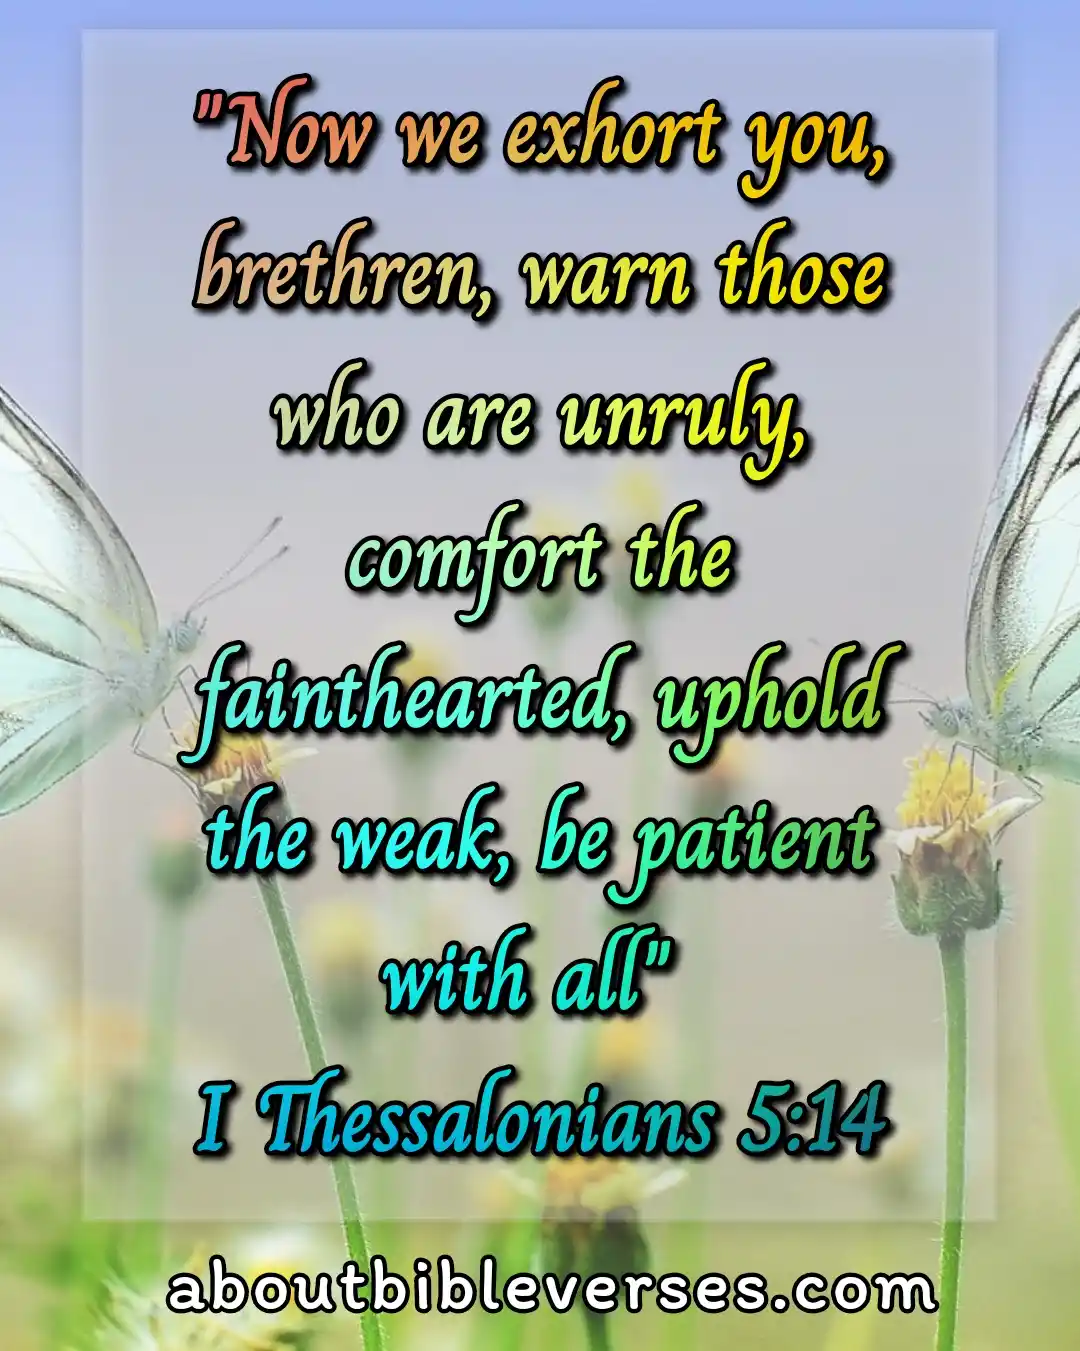 Today bible verses (1 Thessalonians 5:14)